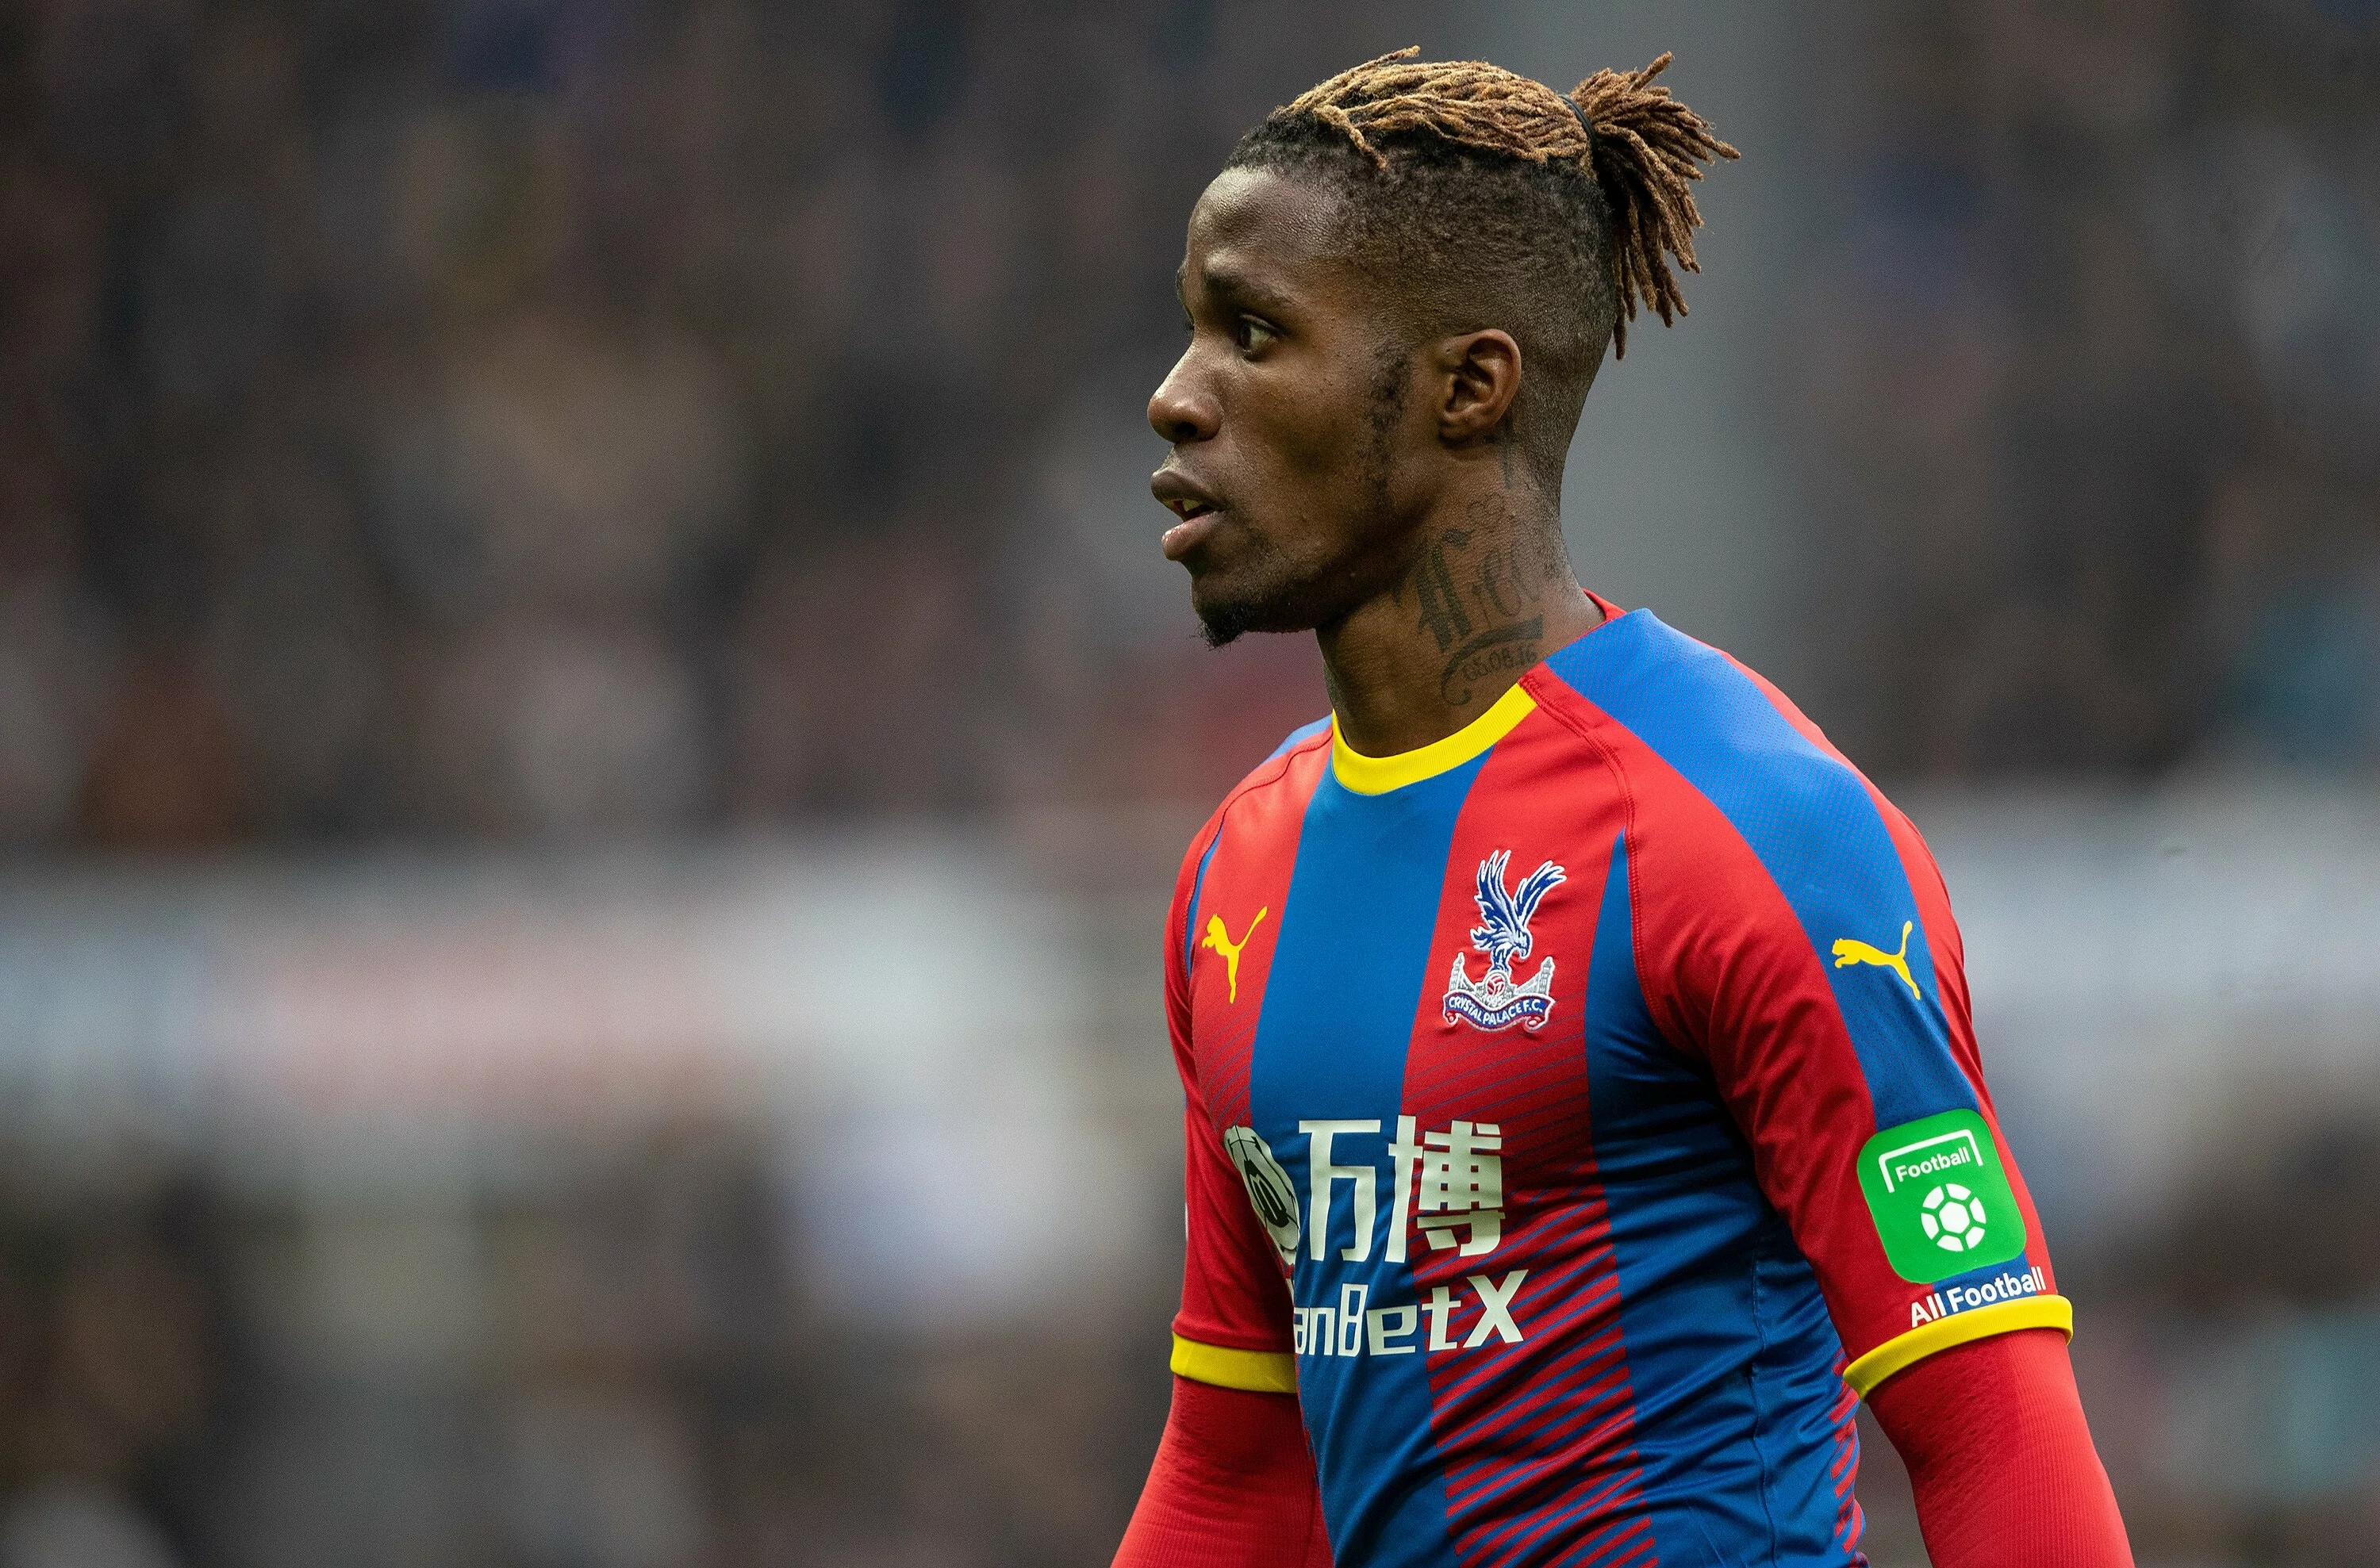 Crystal Palace Have Named A Price For Any Club Looking To Sign Zaha - FootyNews.co.uk